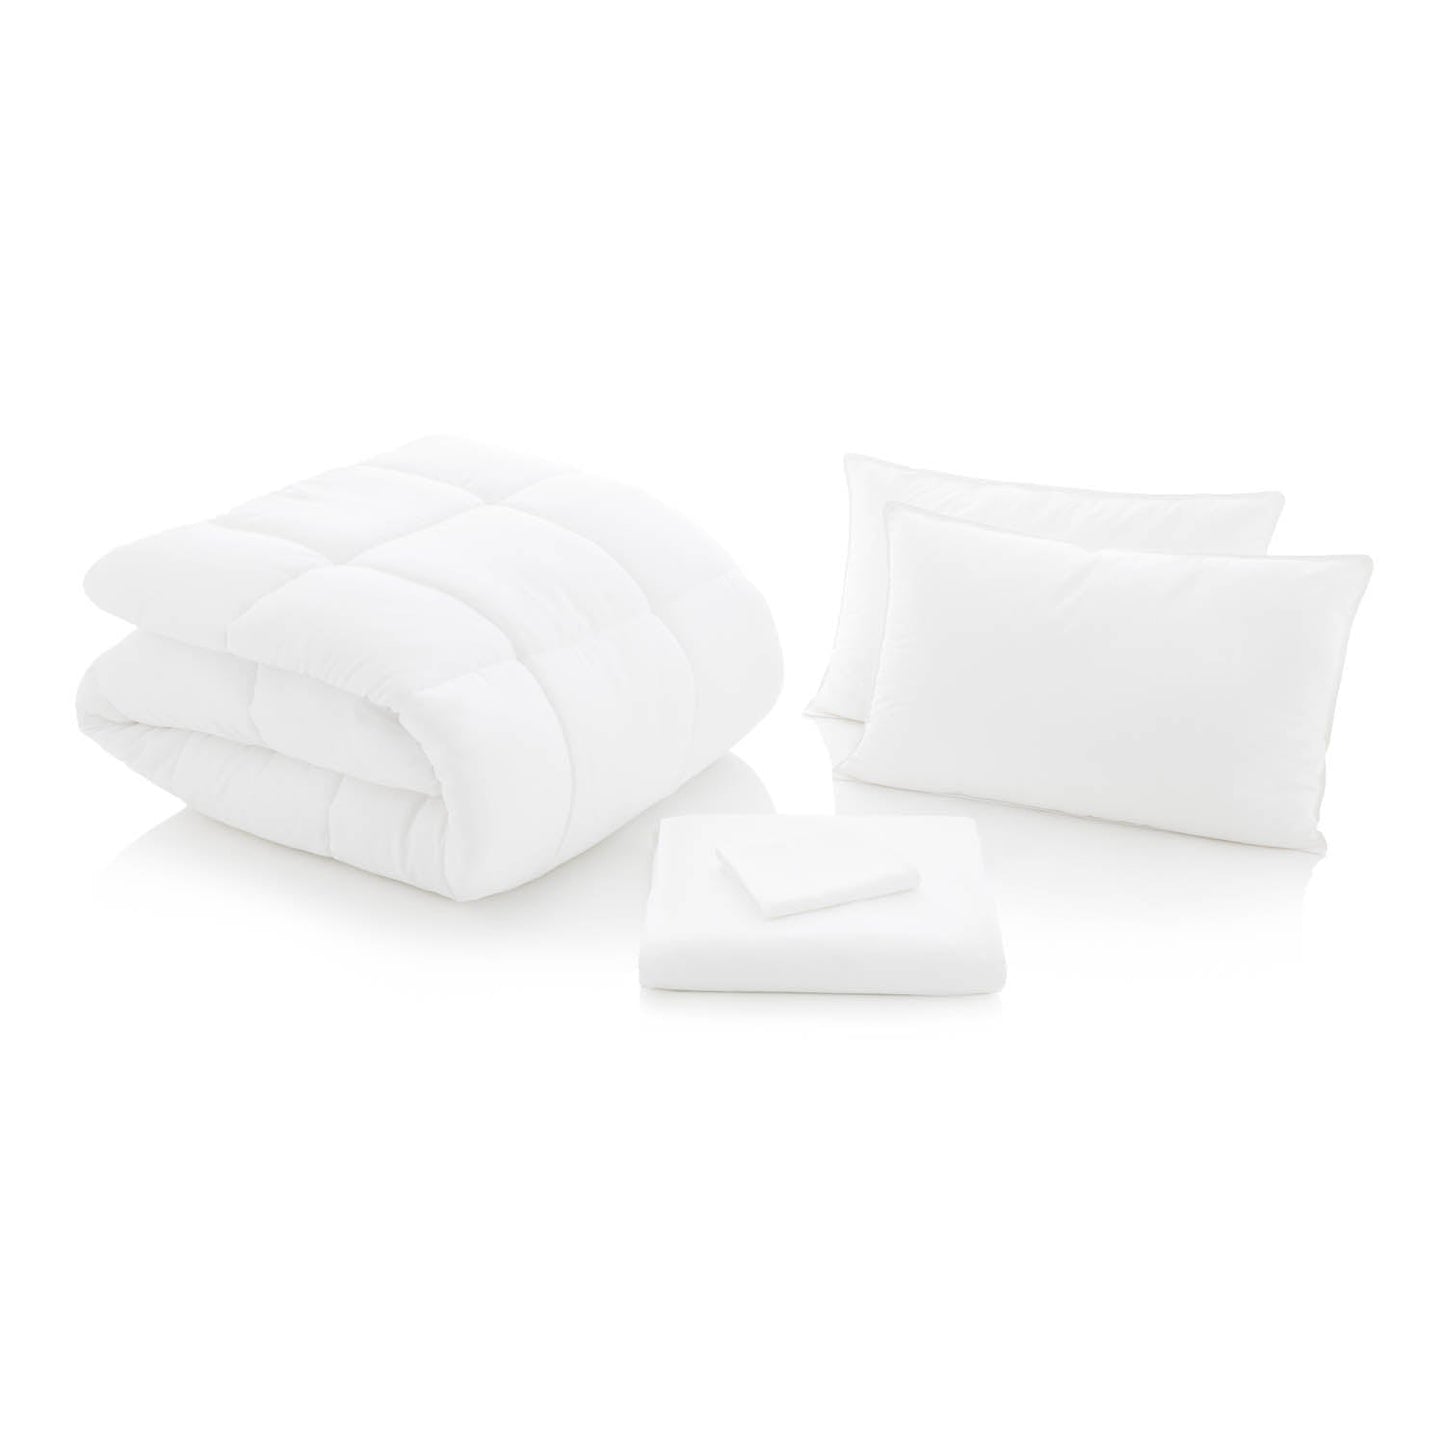 Bed in a Bag Comforter, Sheet & Pillow Set, White